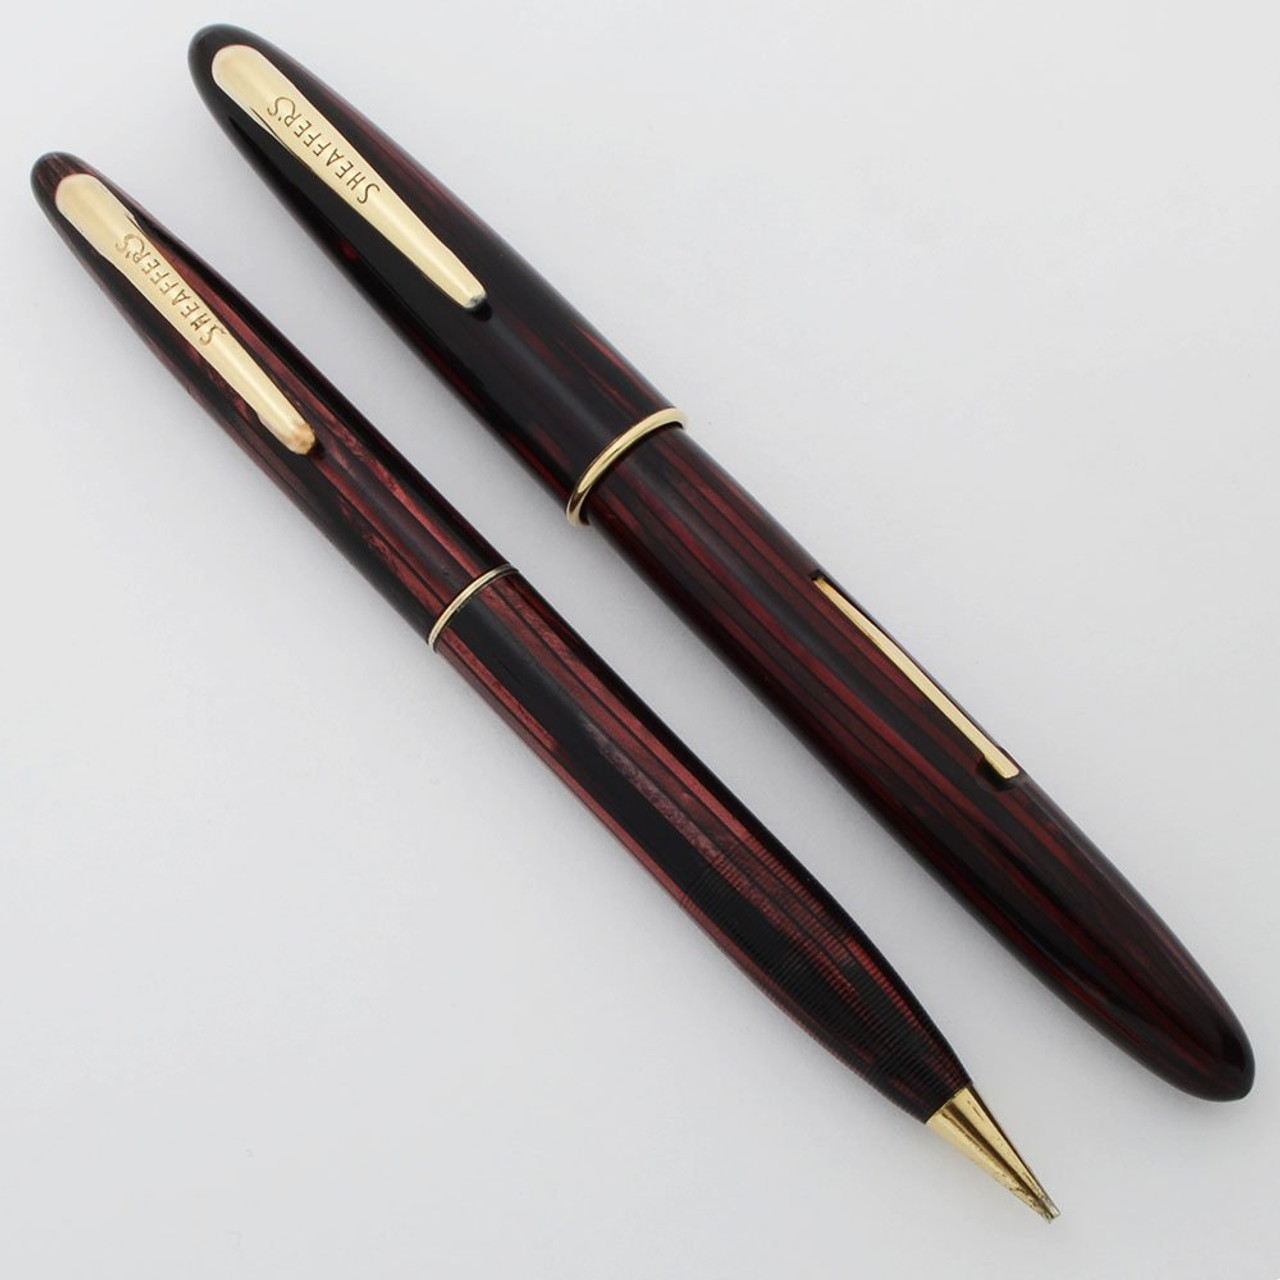 Sheaffer Craftsman 350 Fountain Pen and Pencil Set - Carmine Striated, Medium-Fine Feather Touch Nib, Lever Filler (Excellent +, Restored)